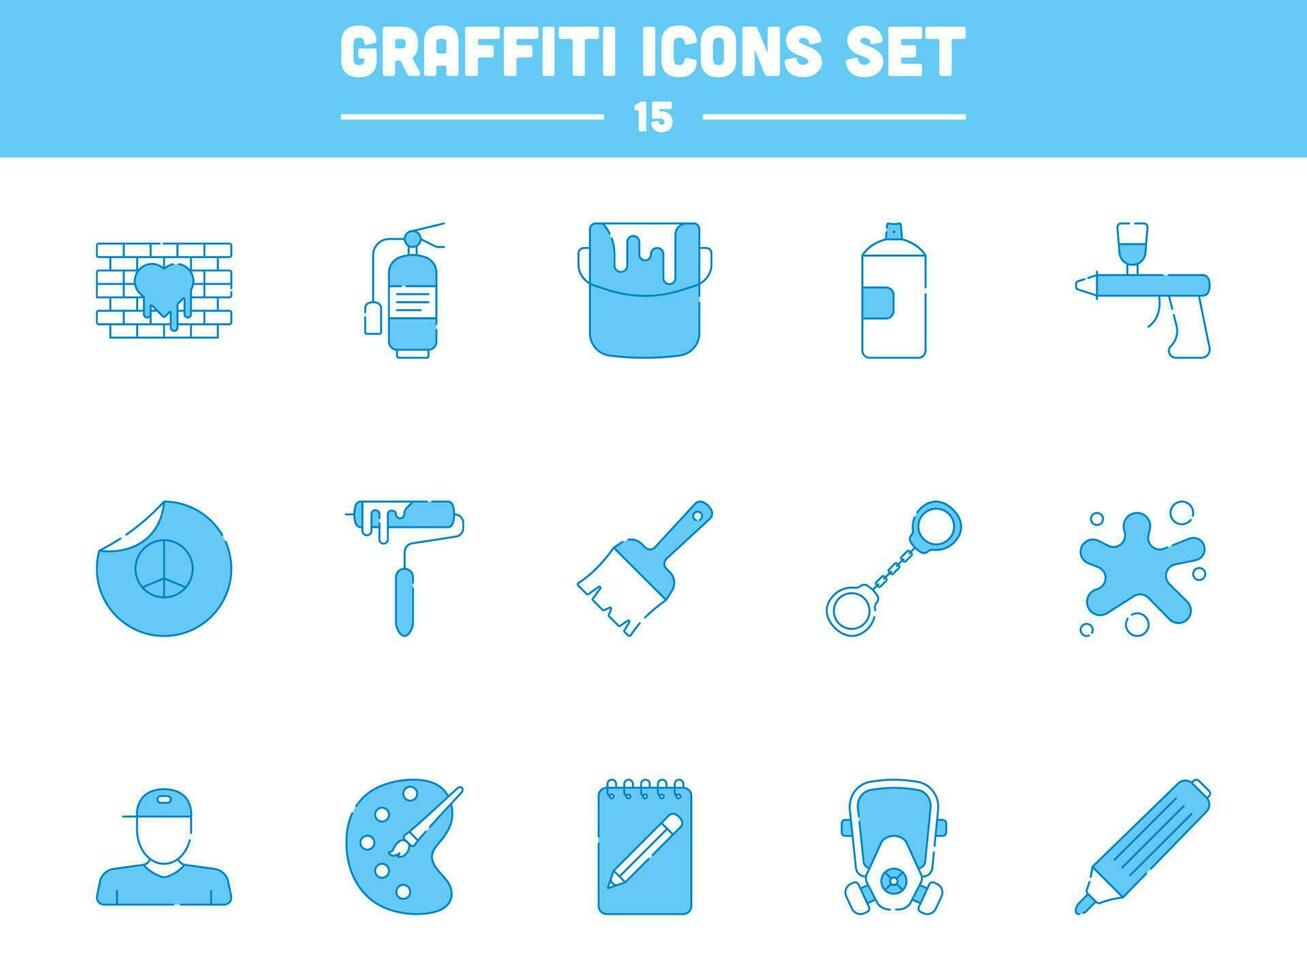 Blue And White Color Set Of Graffiti Icons In Flat Style. vector